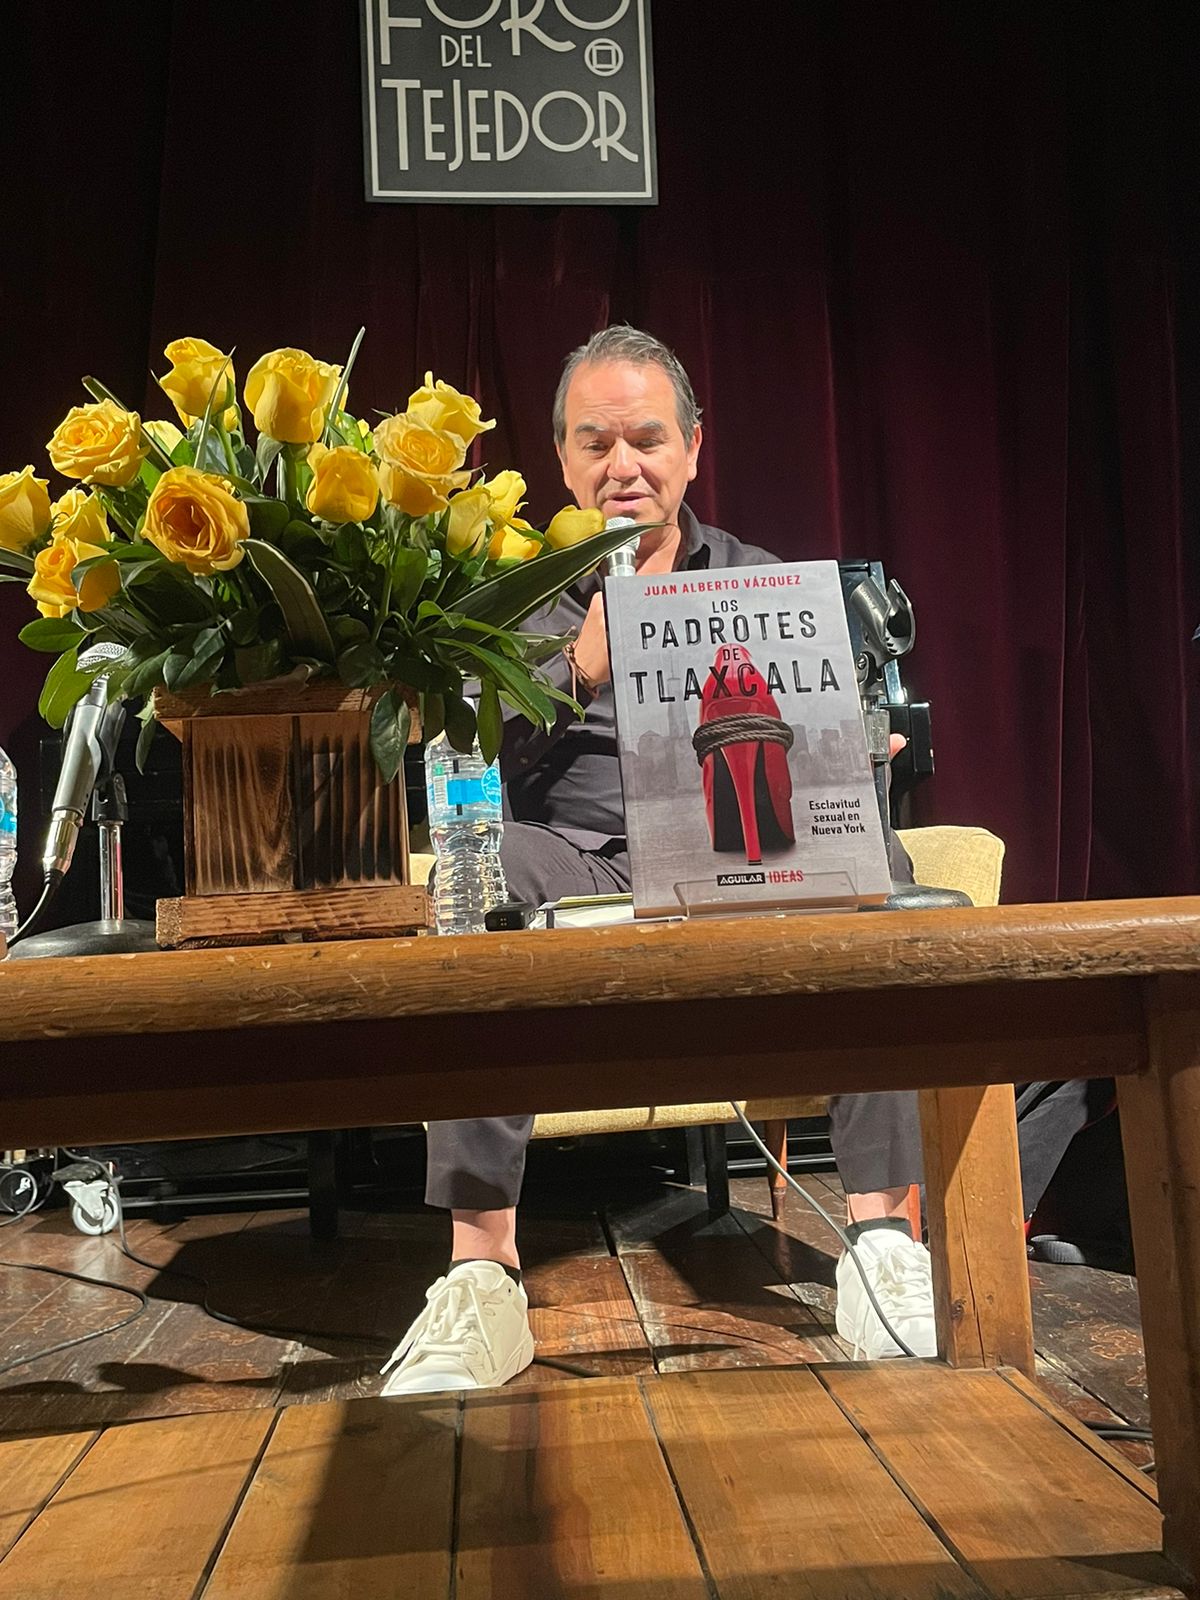 Mexican journalist Juan Alberto Vázquez speaks during the presentation of his book "Los Padrotes de Tlaxcala".